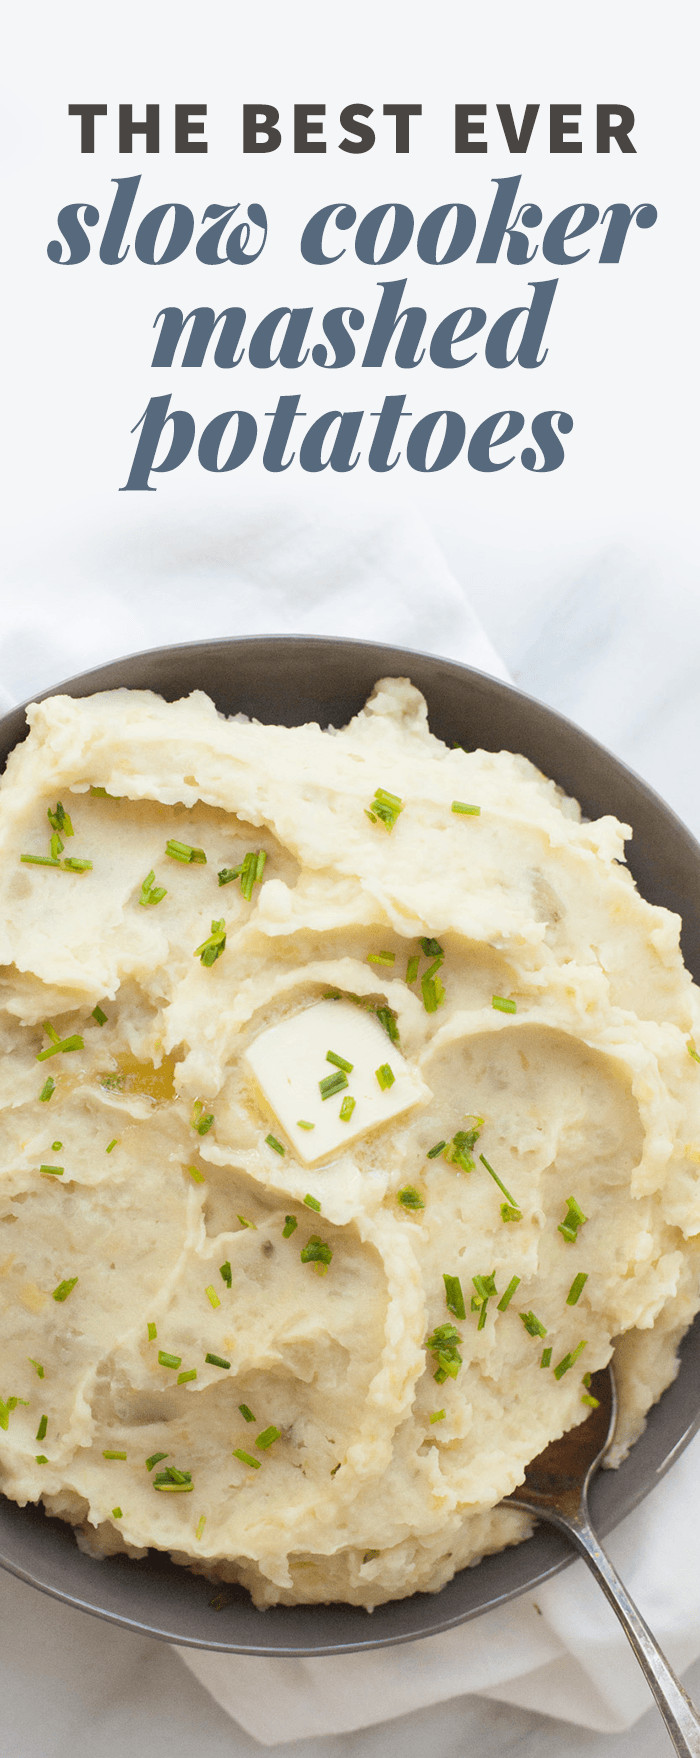 Slow Cooker Mashed Potatoes Recipe
 The Best Ever Slow Cooker Mashed Potatoes Wholefully